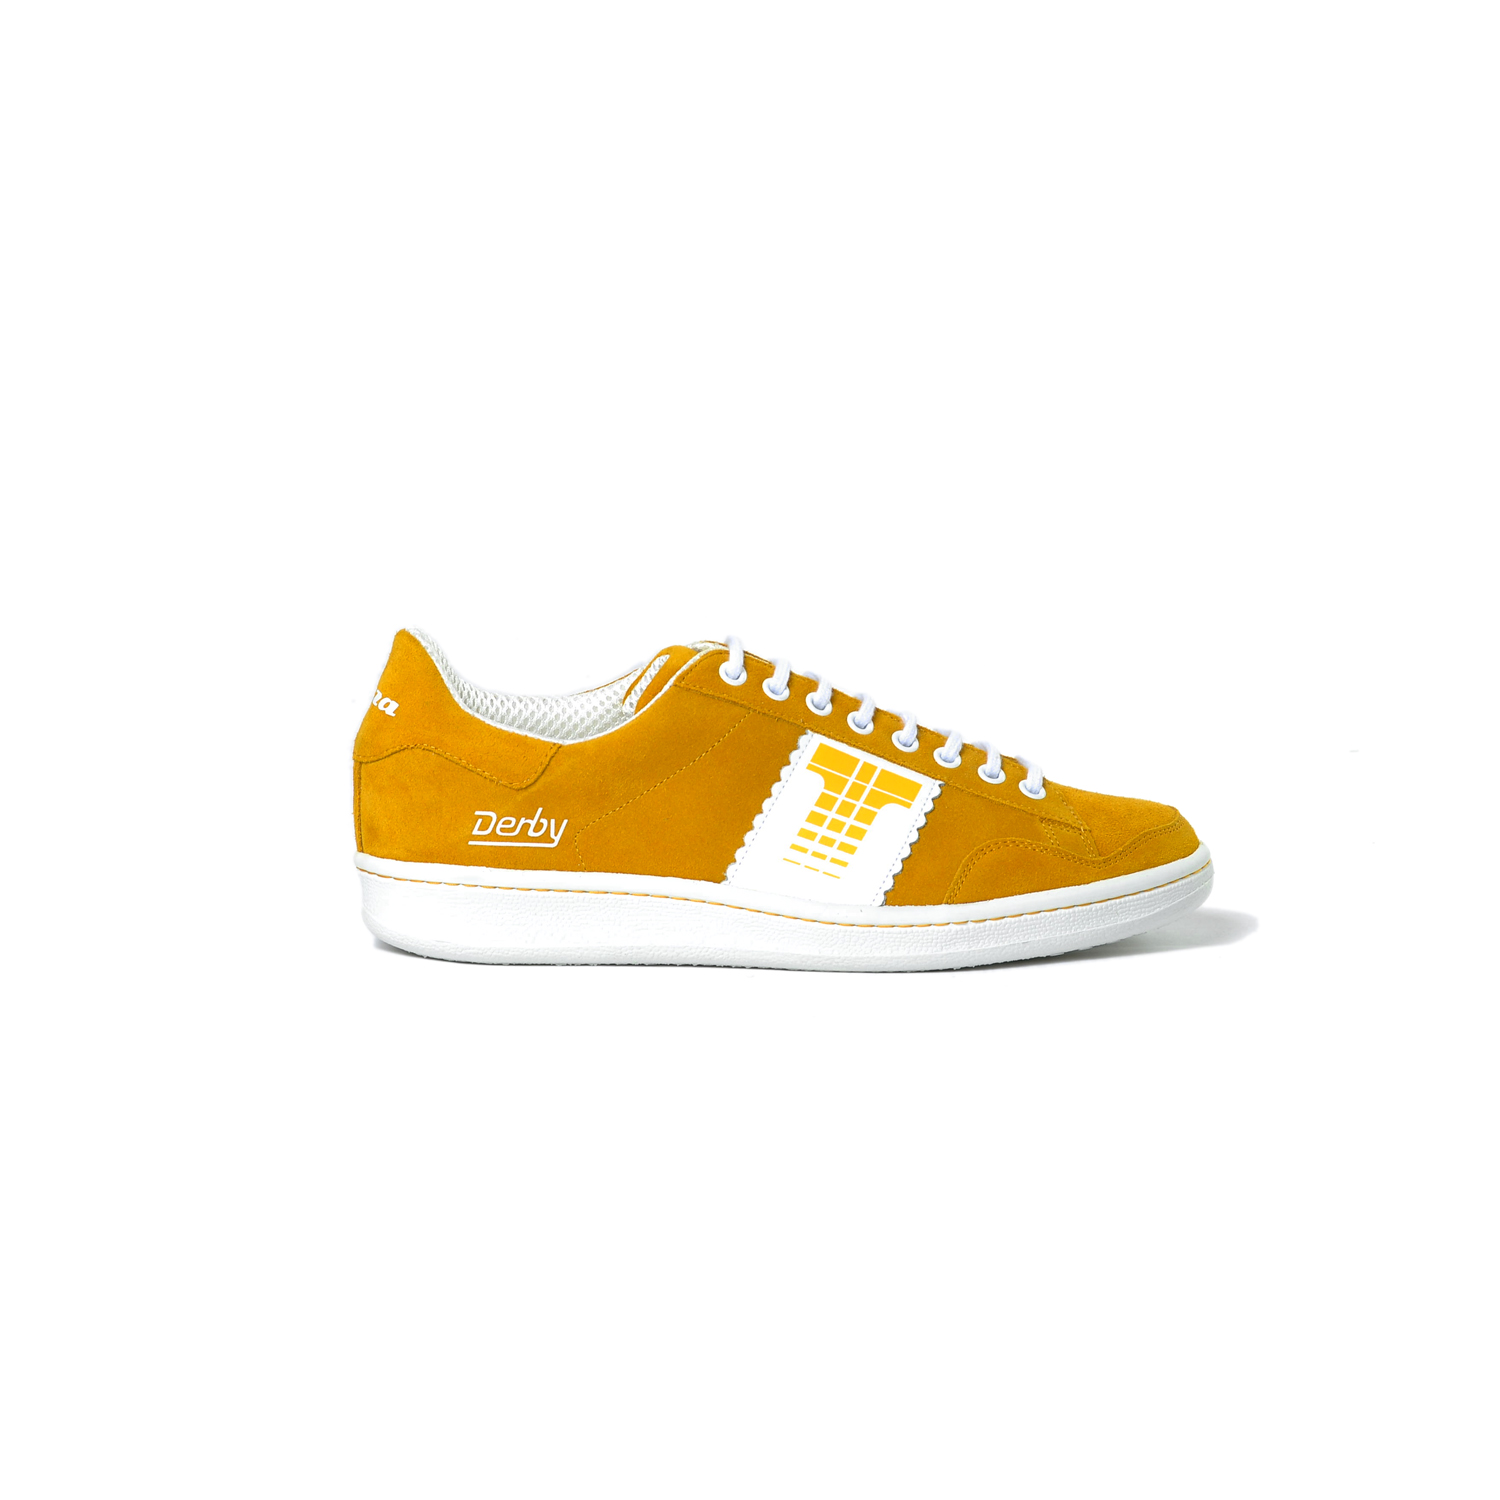 Tisza shoes - Derby - Yellow